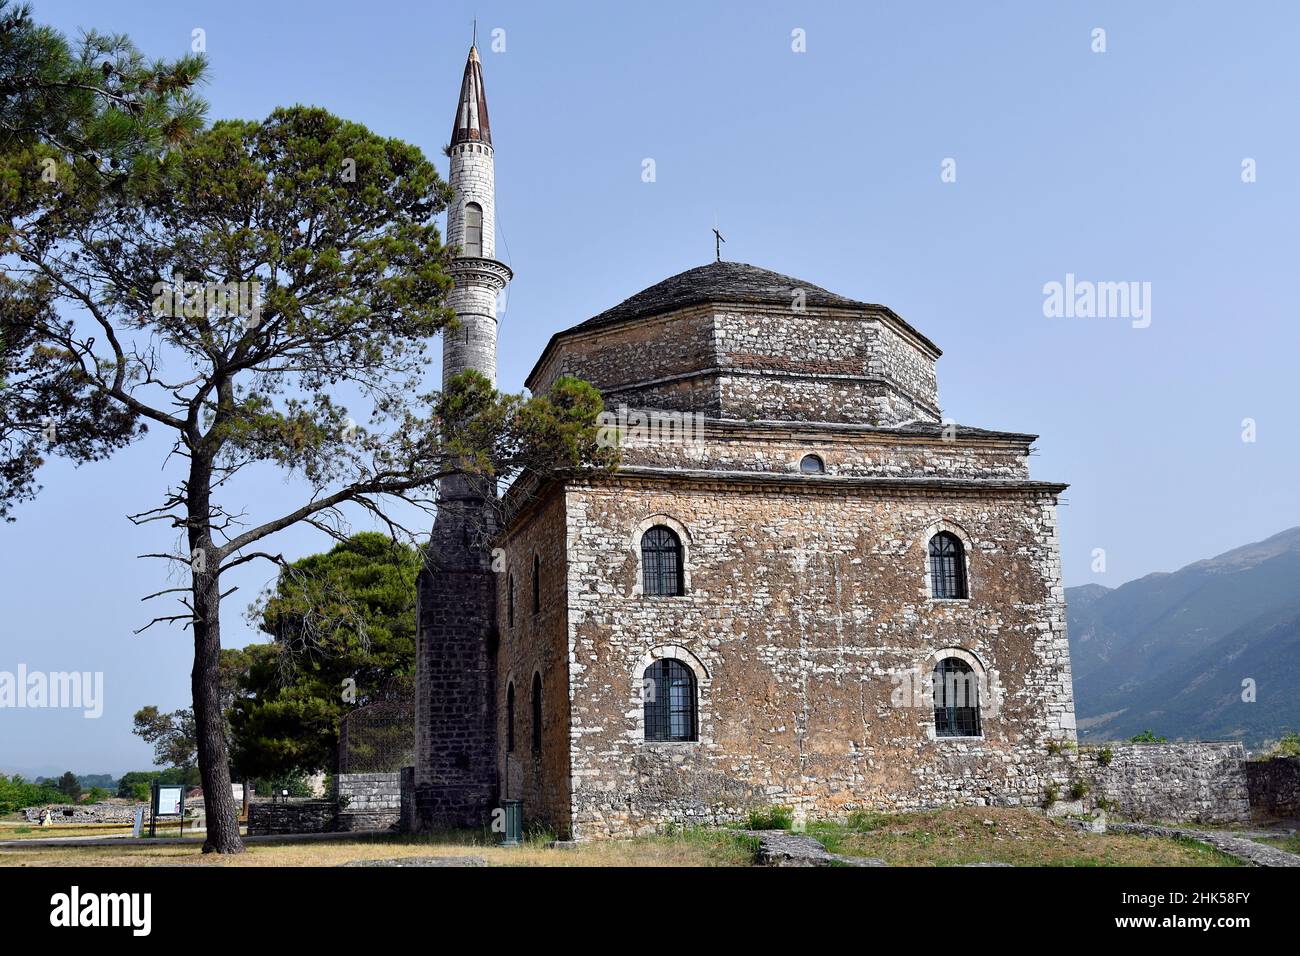 Greece, Fethiye mosque in the old byzantine castle of Ioannina, the capital city of Epirus Stock Photo